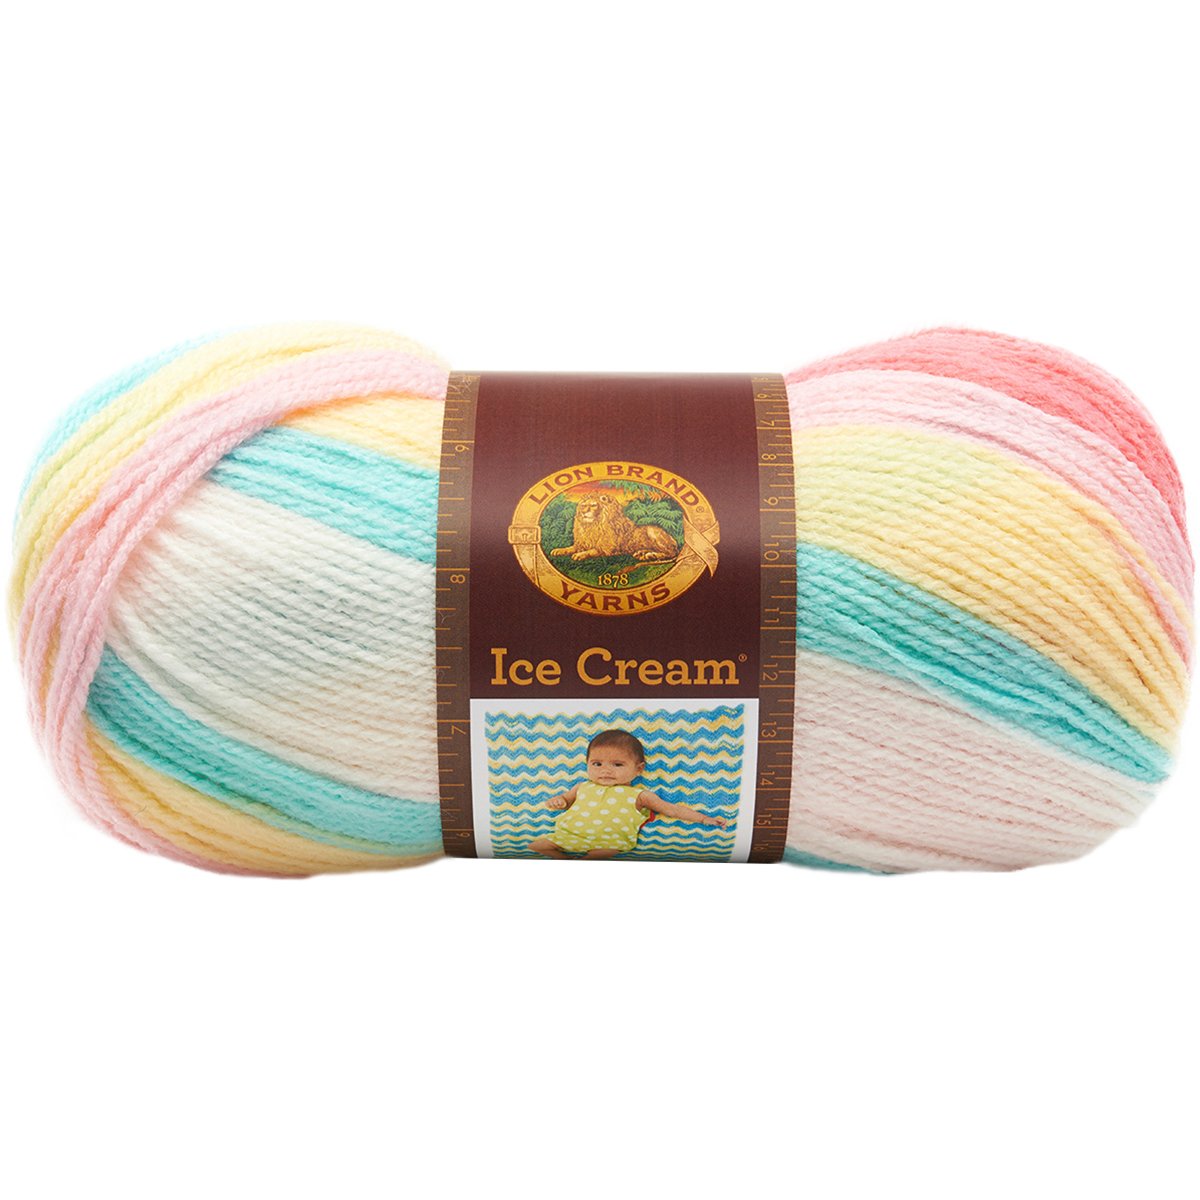 Lion Brand Yarn - Our favorite kind of Ice Cream is now on